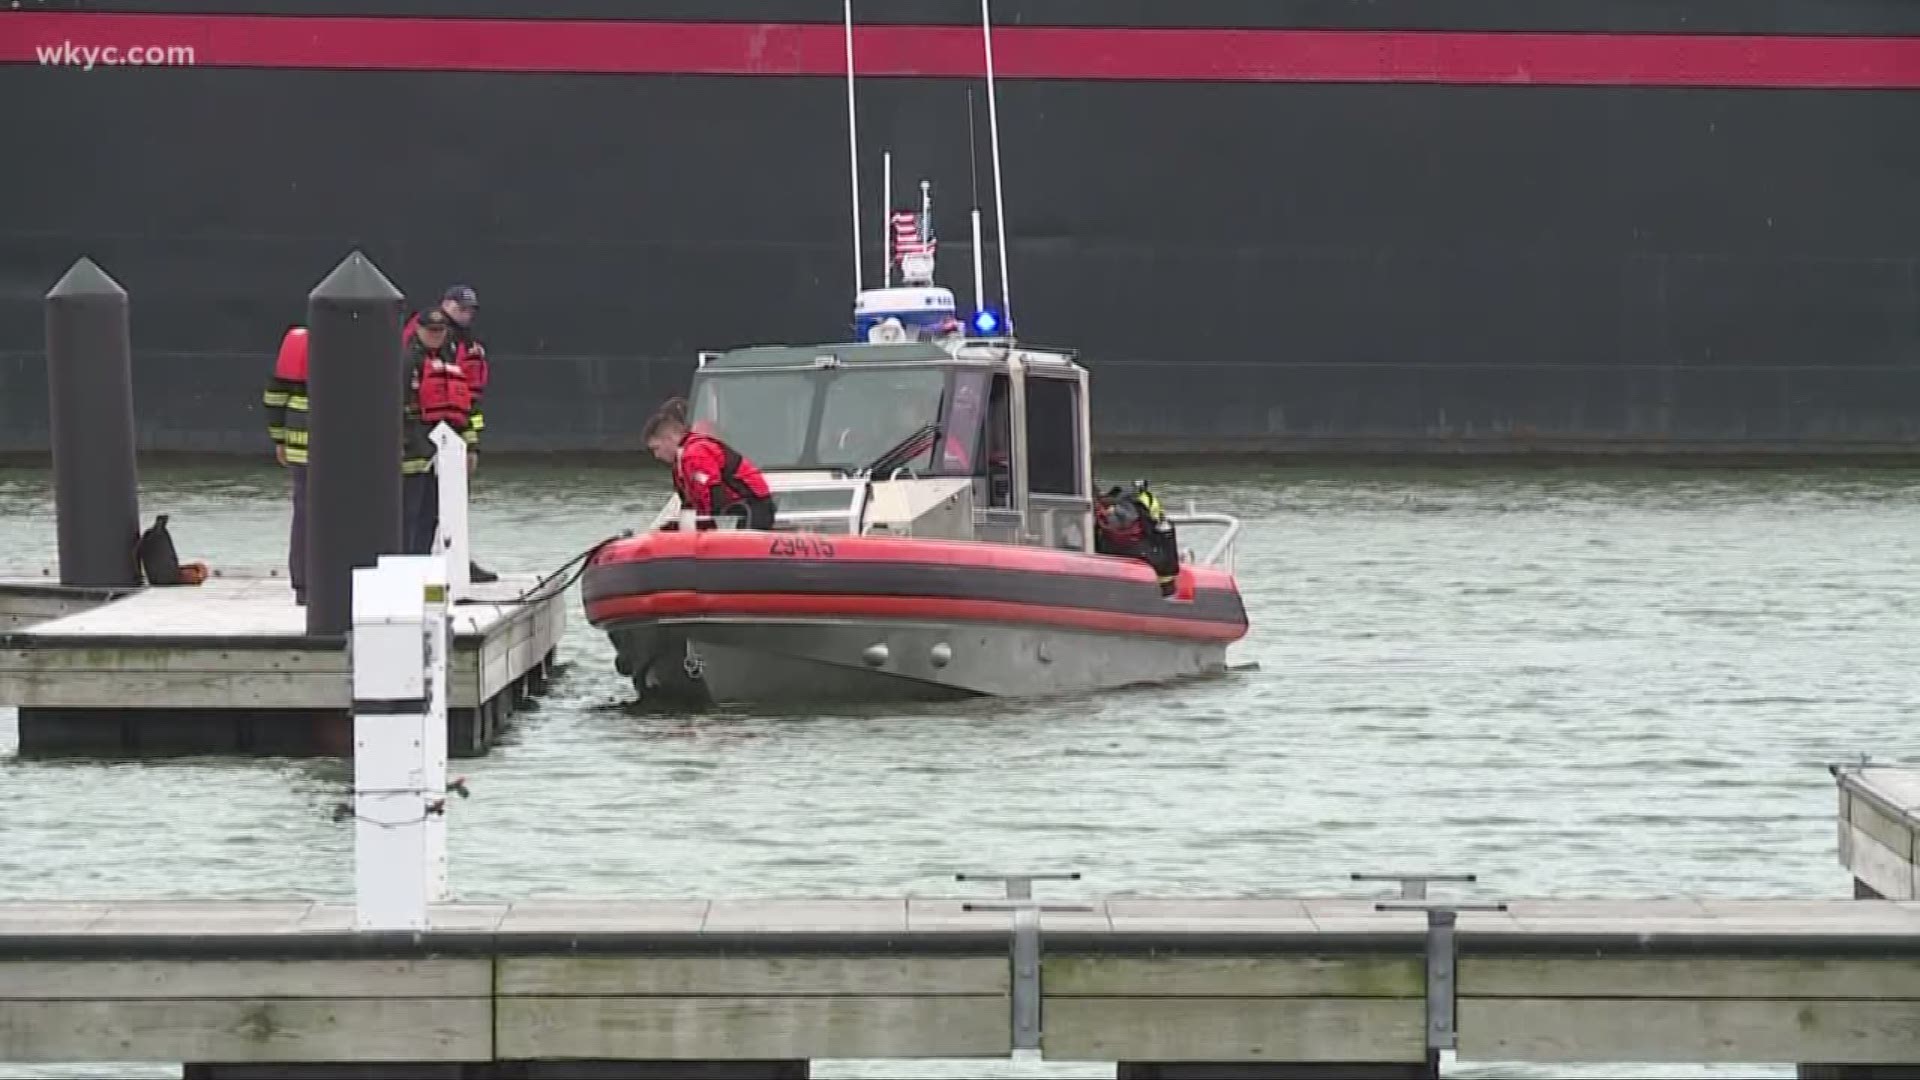 May 21, 2019: After suspending their efforts Monday, search teams returned to the area around 9 a.m. Tuesday. According to reports, the man jumped fully clothed in the water at Voinovich Park on Monday.